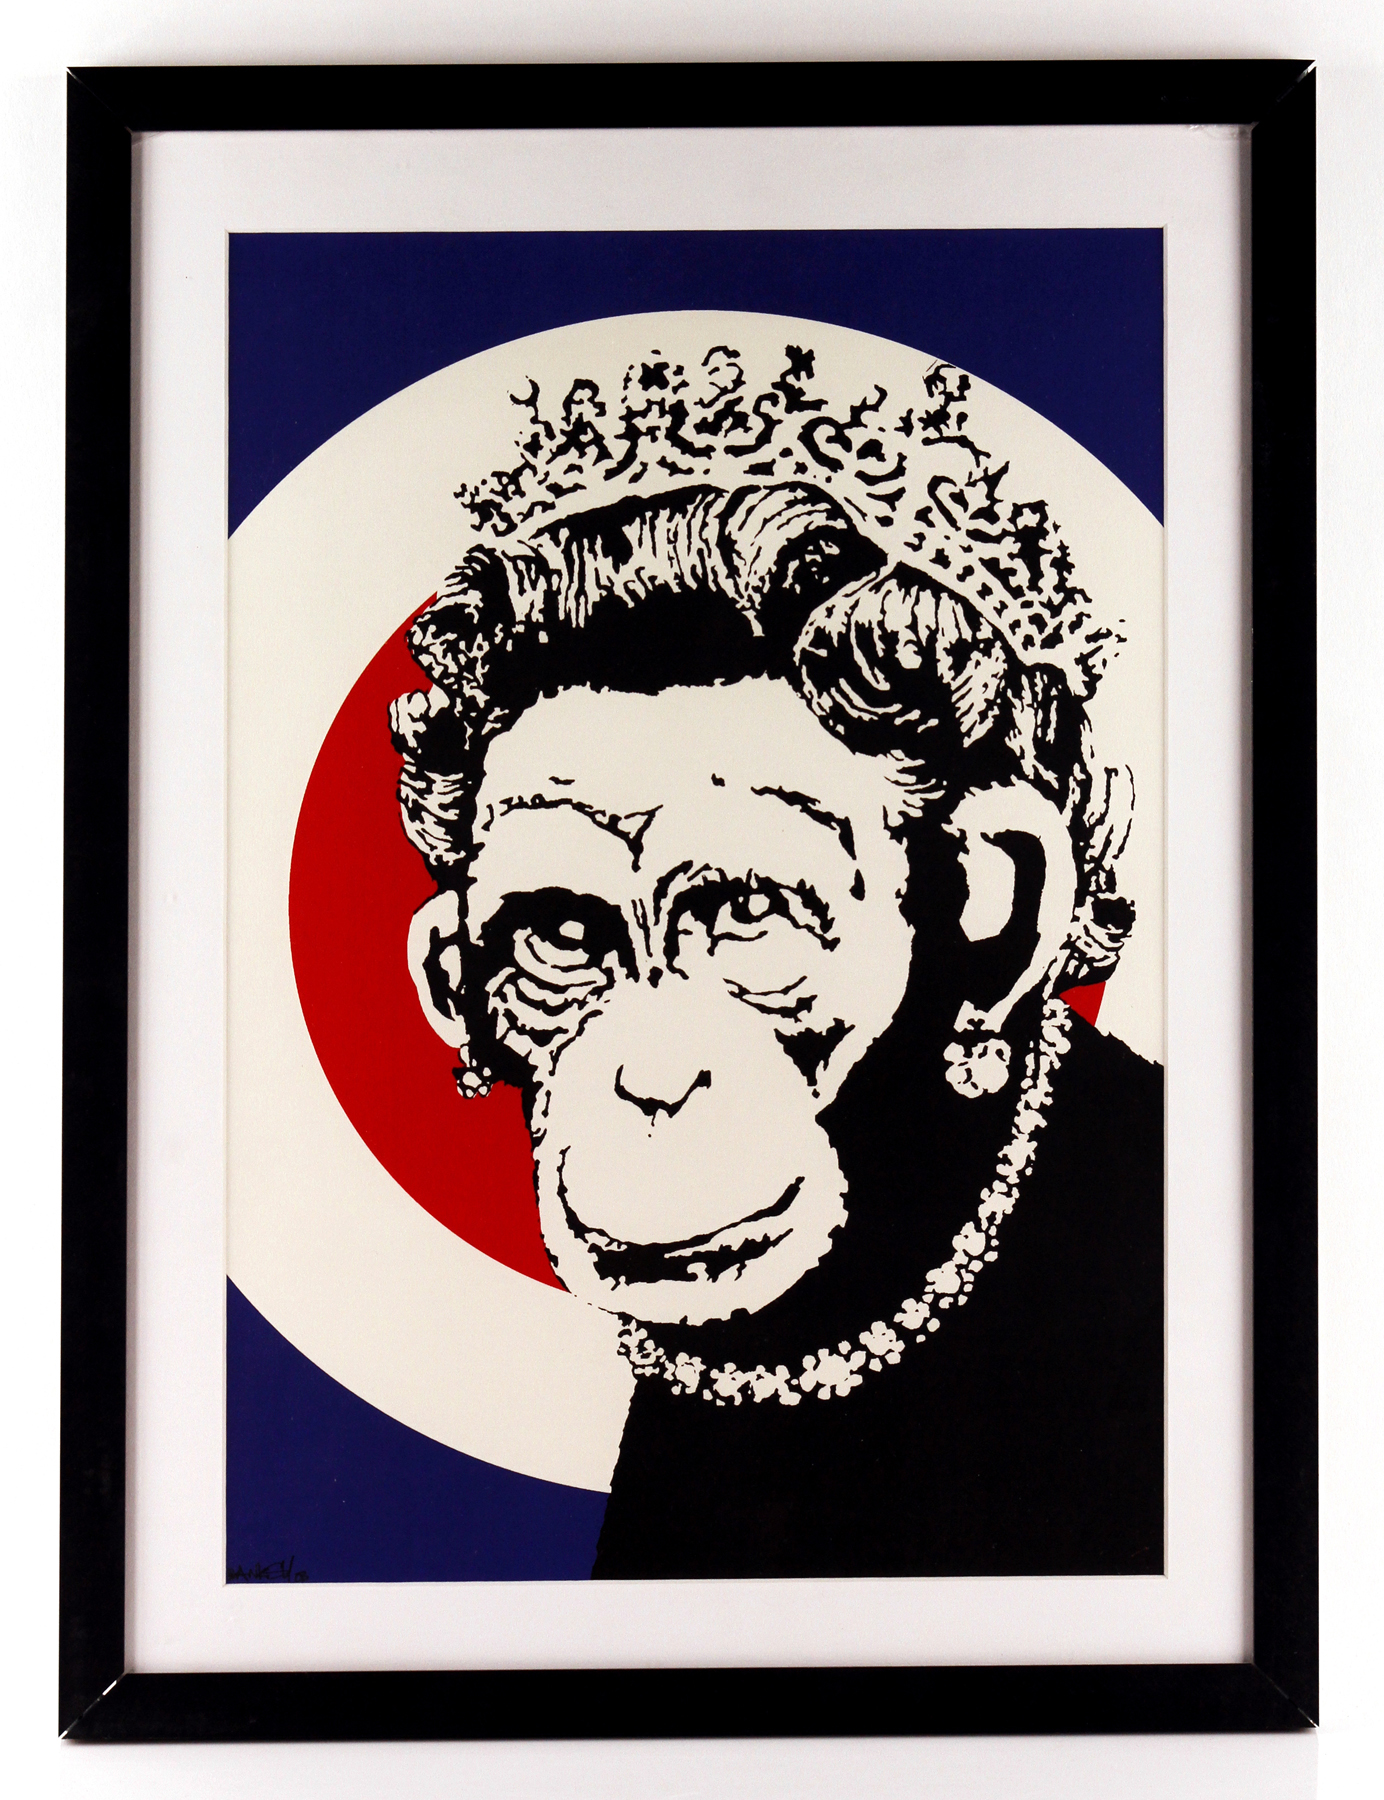 Banksy, "Queen Chimp", screenprint, signed and dated lower left "Banksy 2003"